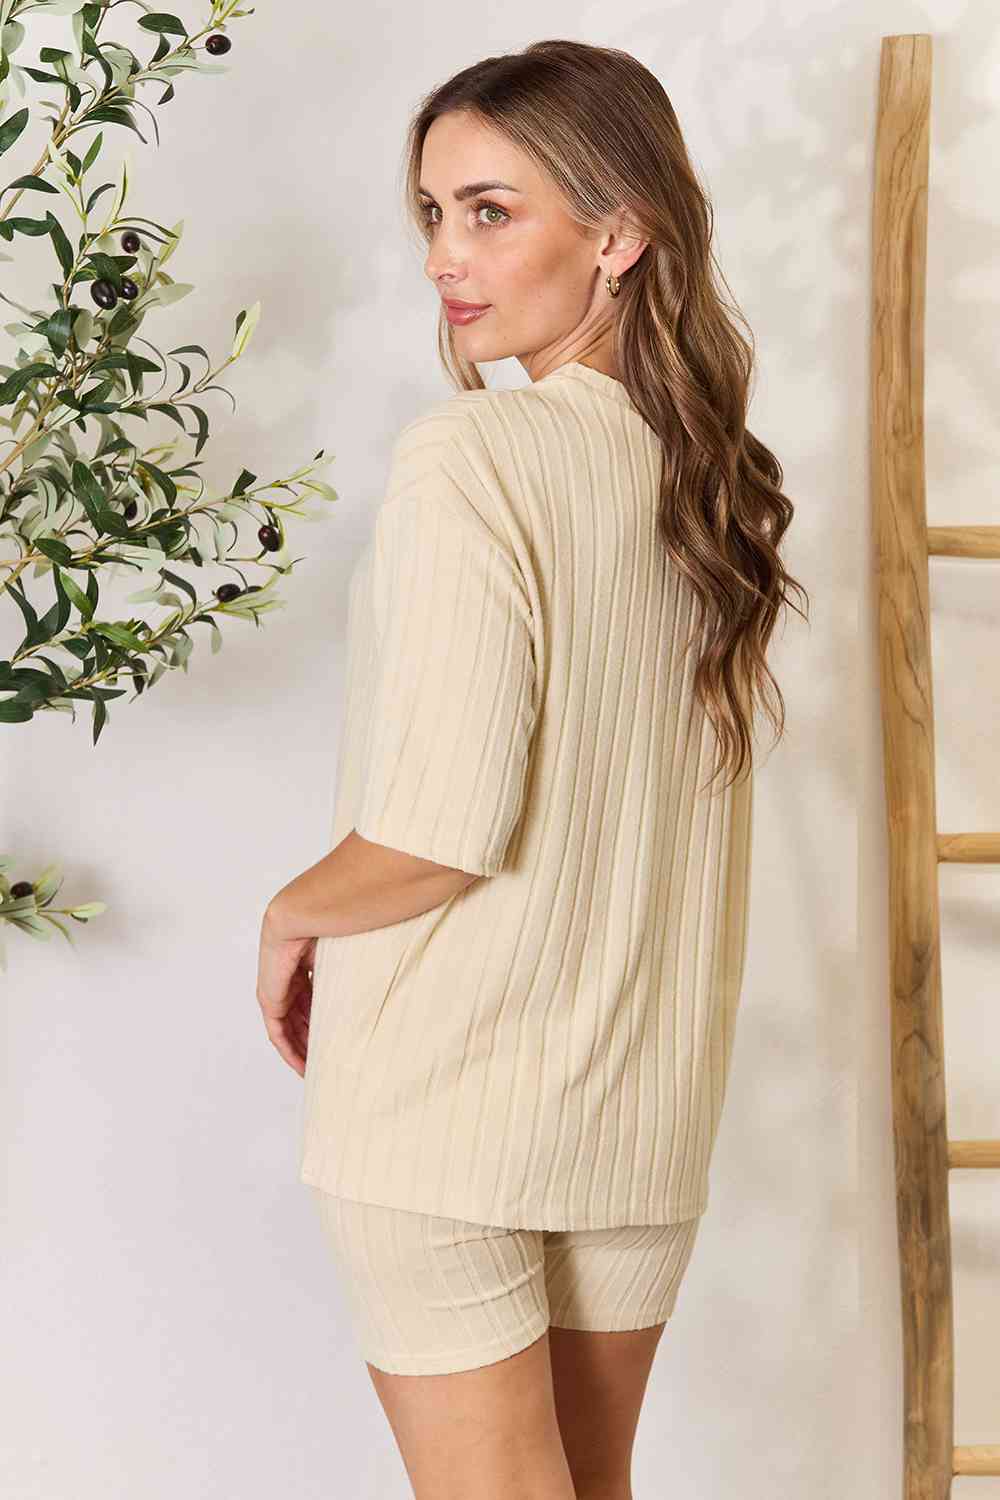 Ribbed Knit Round Neck Top and Shorts Loungewear Set in Sand - Southern Soul Collectives